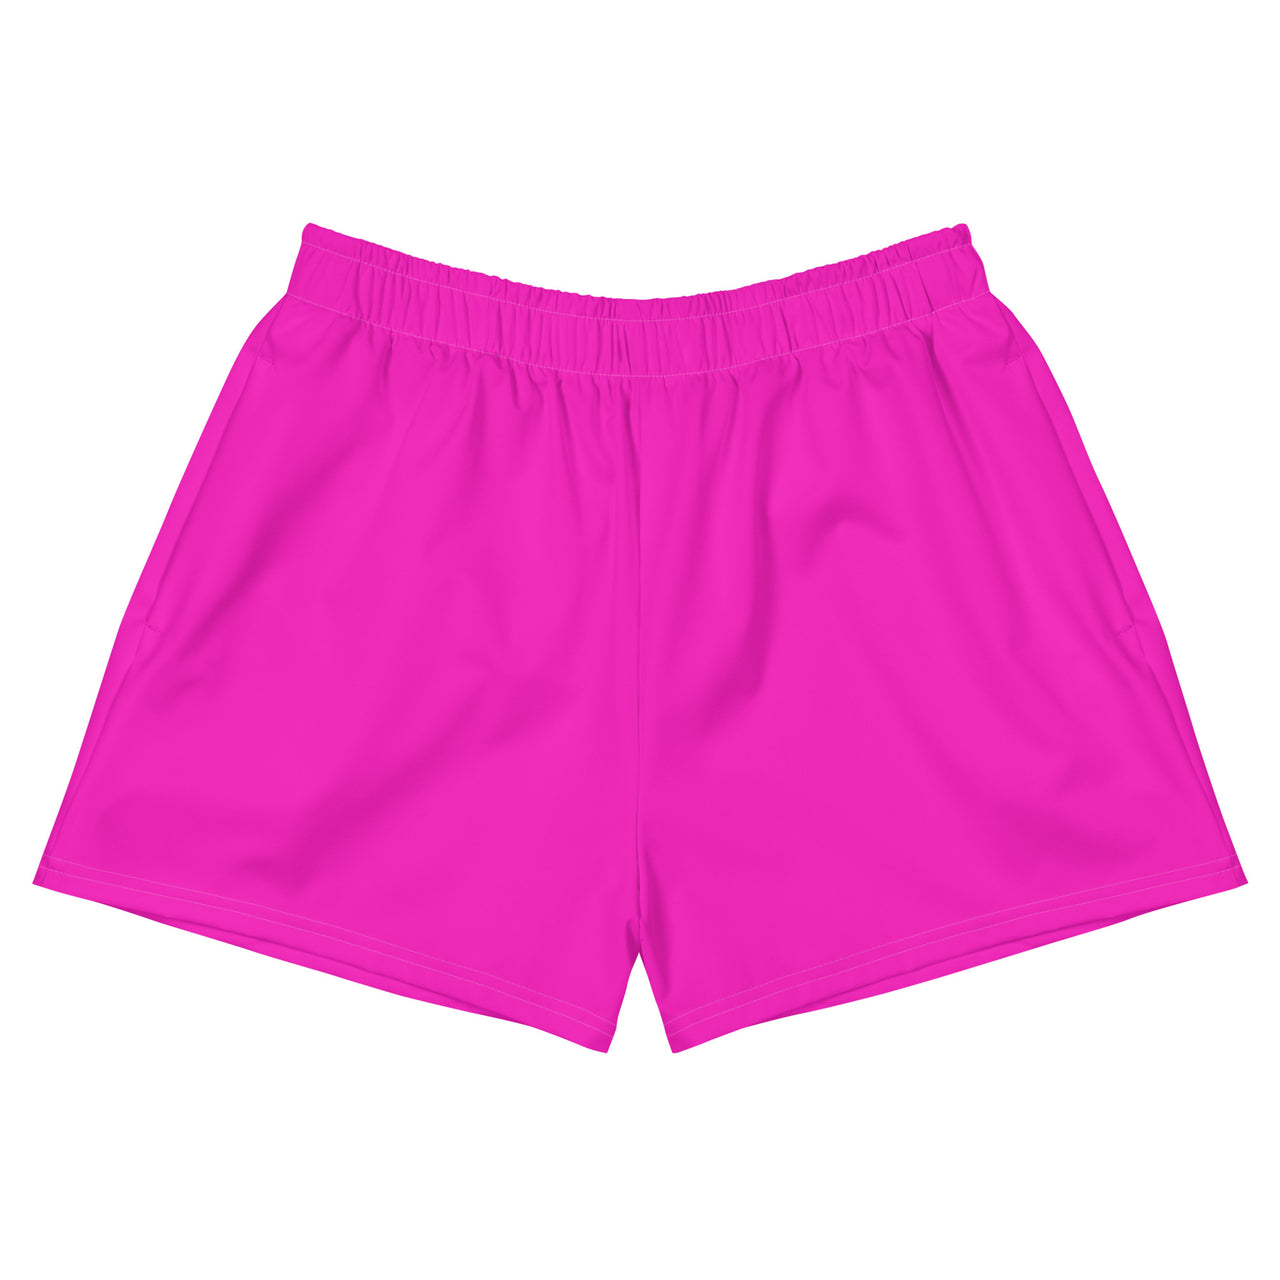 Women’s Recycled Solid Athletic Shorts - Shocking Pink SHAVA CO